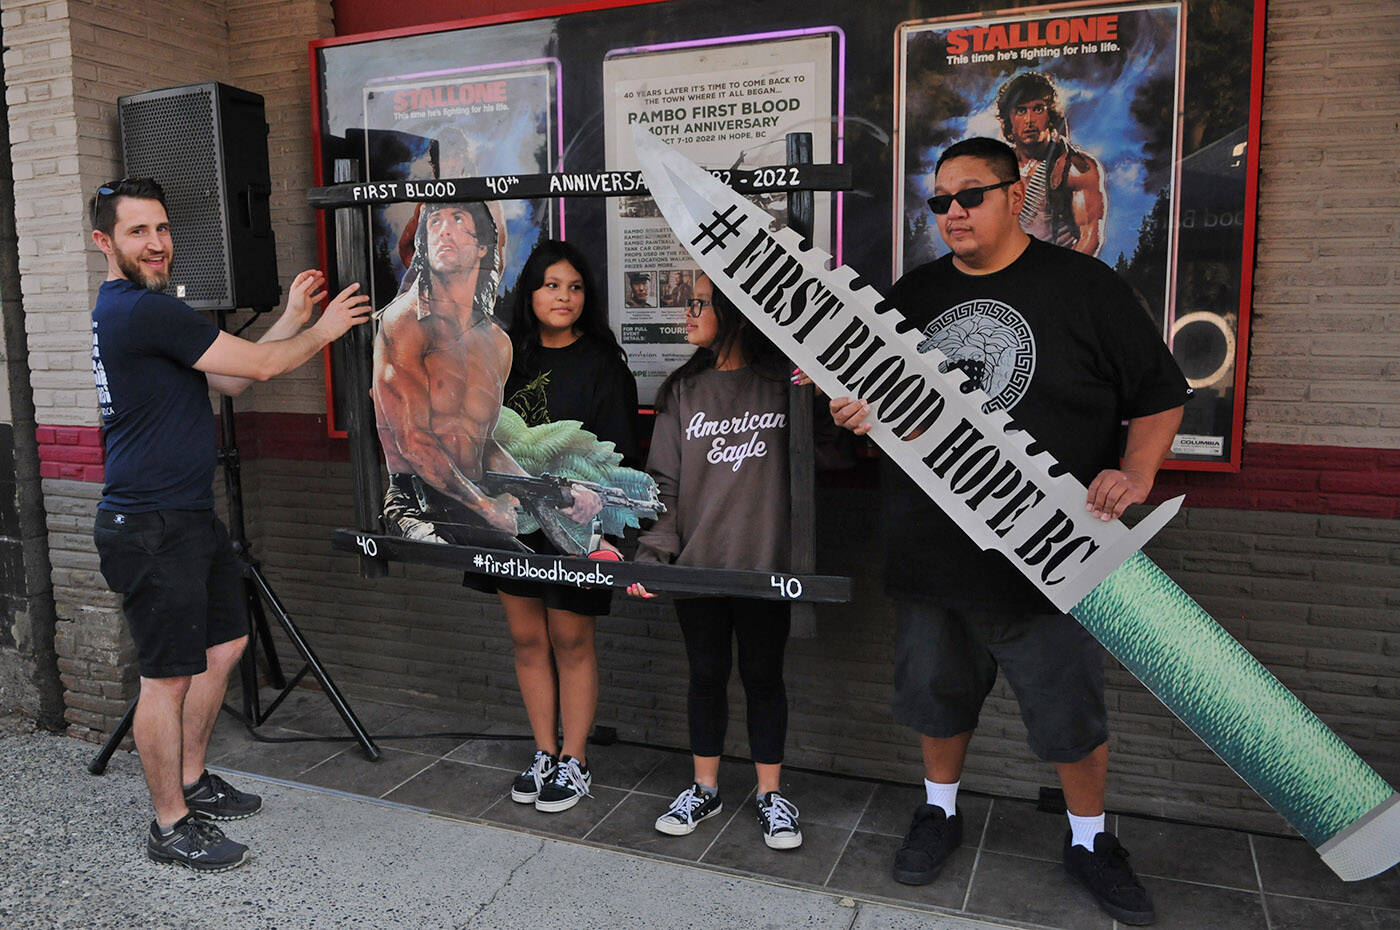 Fans prepare to pose for a photo during the Rambo First Blood 40th Anniversary celebrations in Hope on Saturday, Oct. 8, 2022. (Jenna Hauck/ Black Press Media)